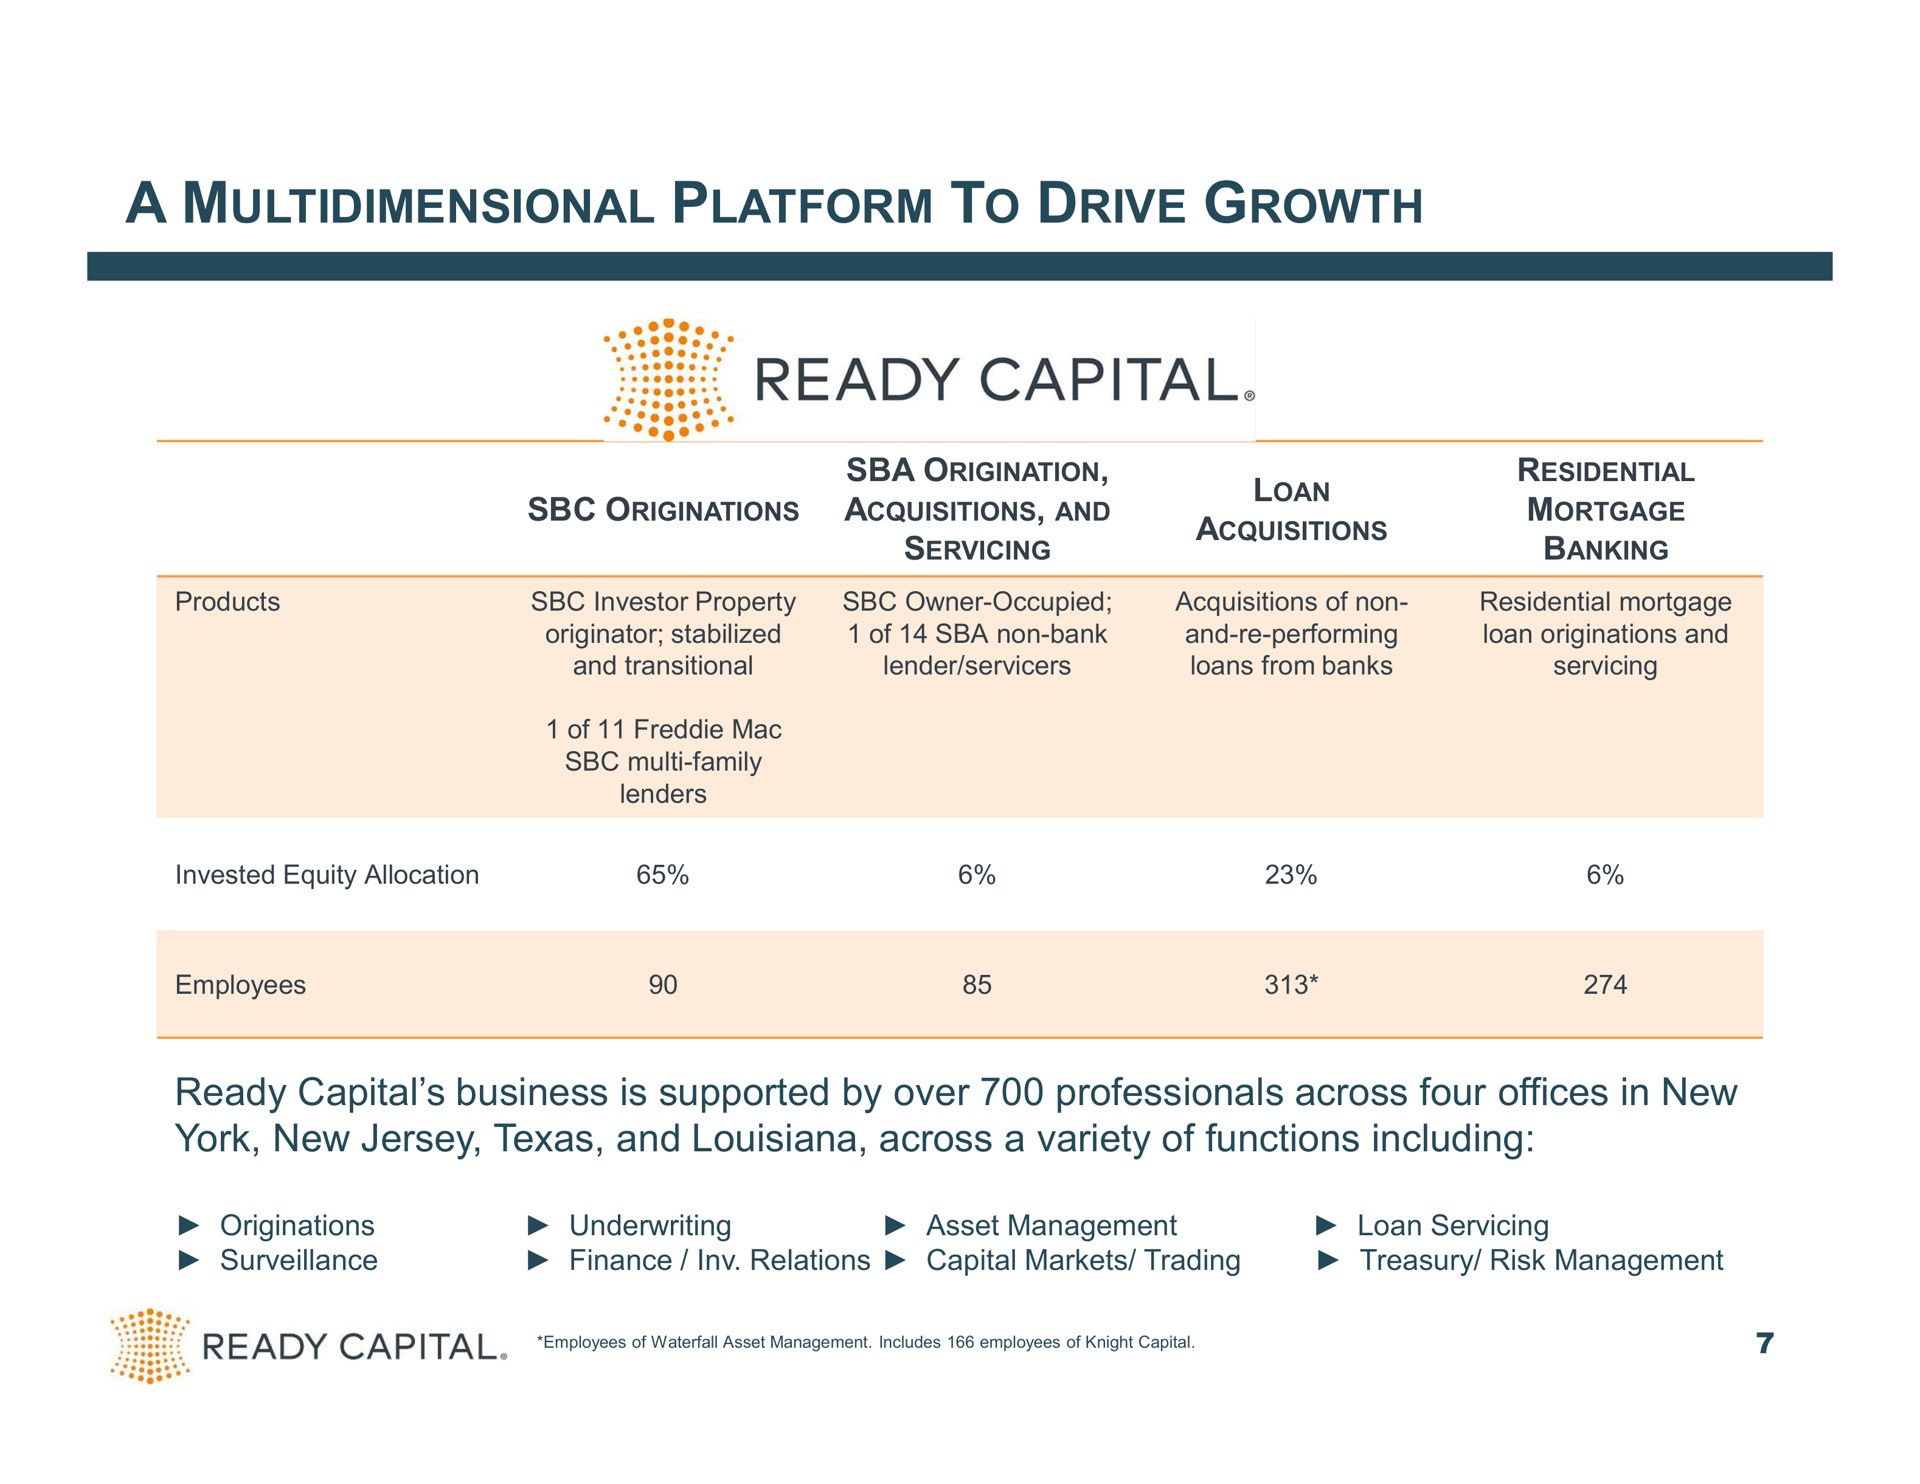 a multidimensional platform to drive growth ready capital business is supported by over professionals across four offices in new york new jersey and across a variety of functions including originations surveillance underwriting finance relations capital markets trading treasury risk management asset management loan servicing | Ready Capital